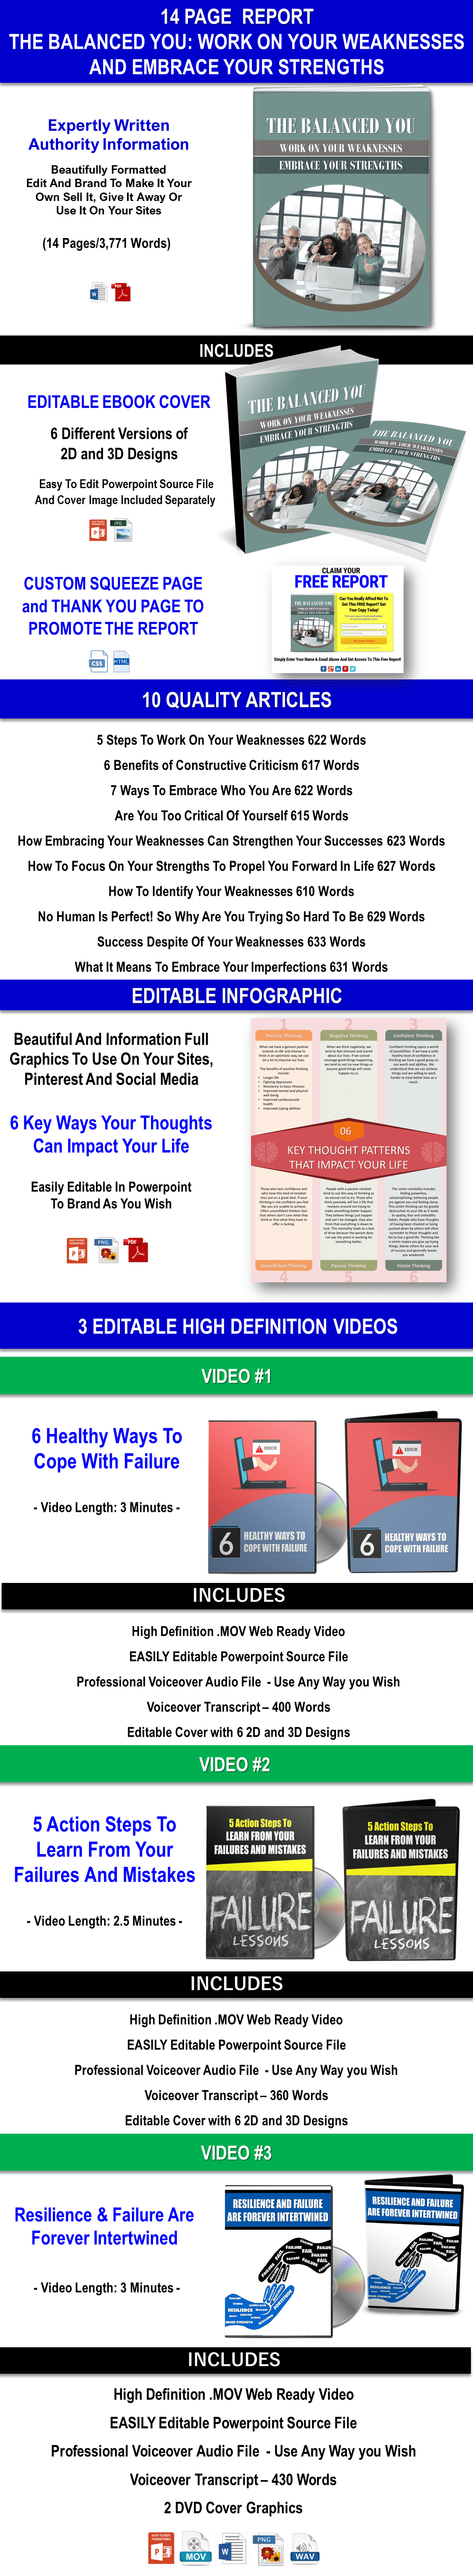 7 Part eCourse: 7 Components Of Resilience Giant Content Pack - Private Label Rights